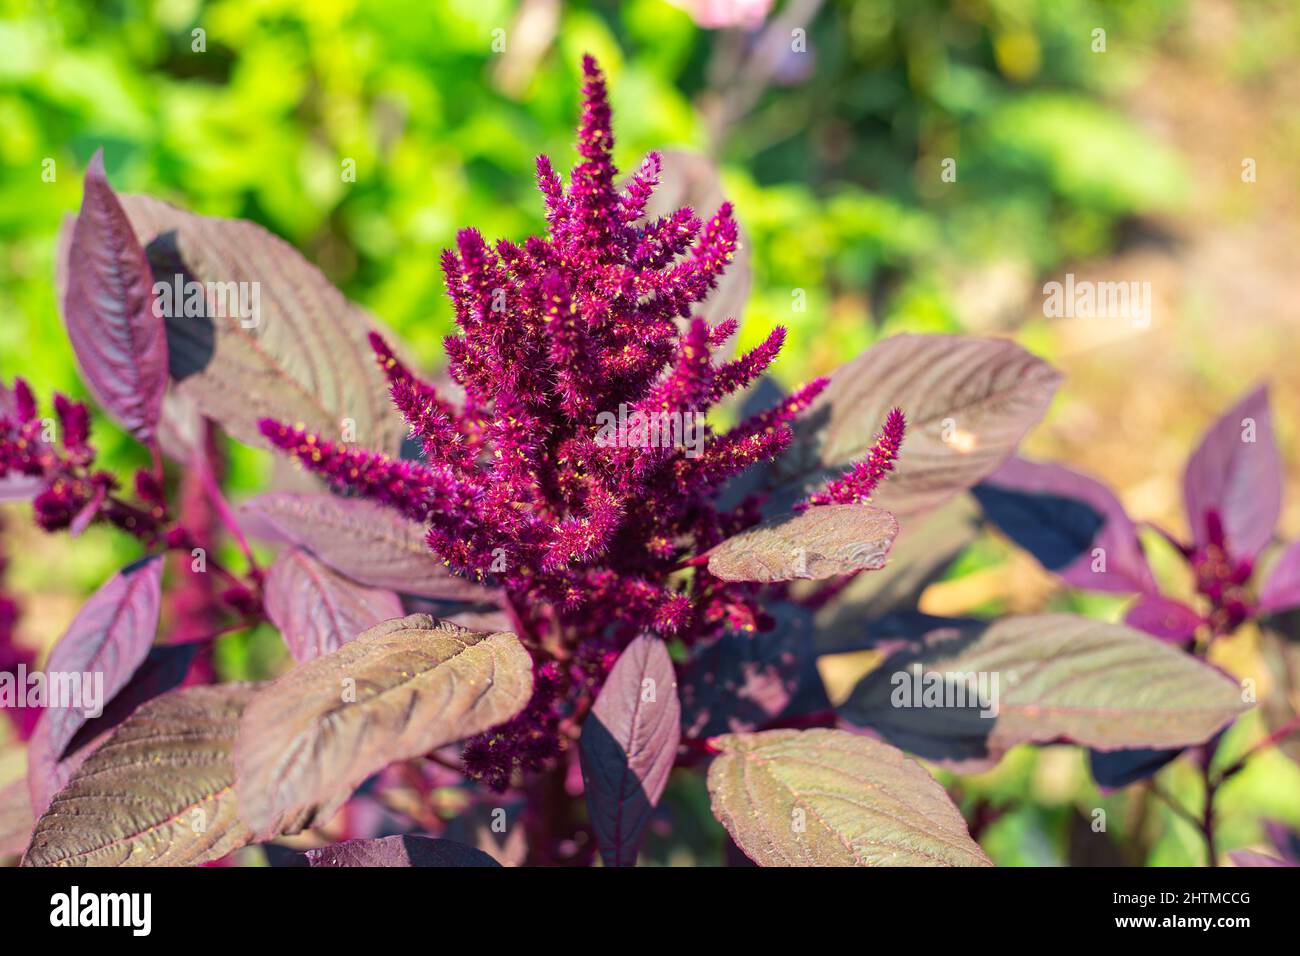 Beautiful purple flowers seeds of vegetable amaranth bloom in the garden. Stock Photo